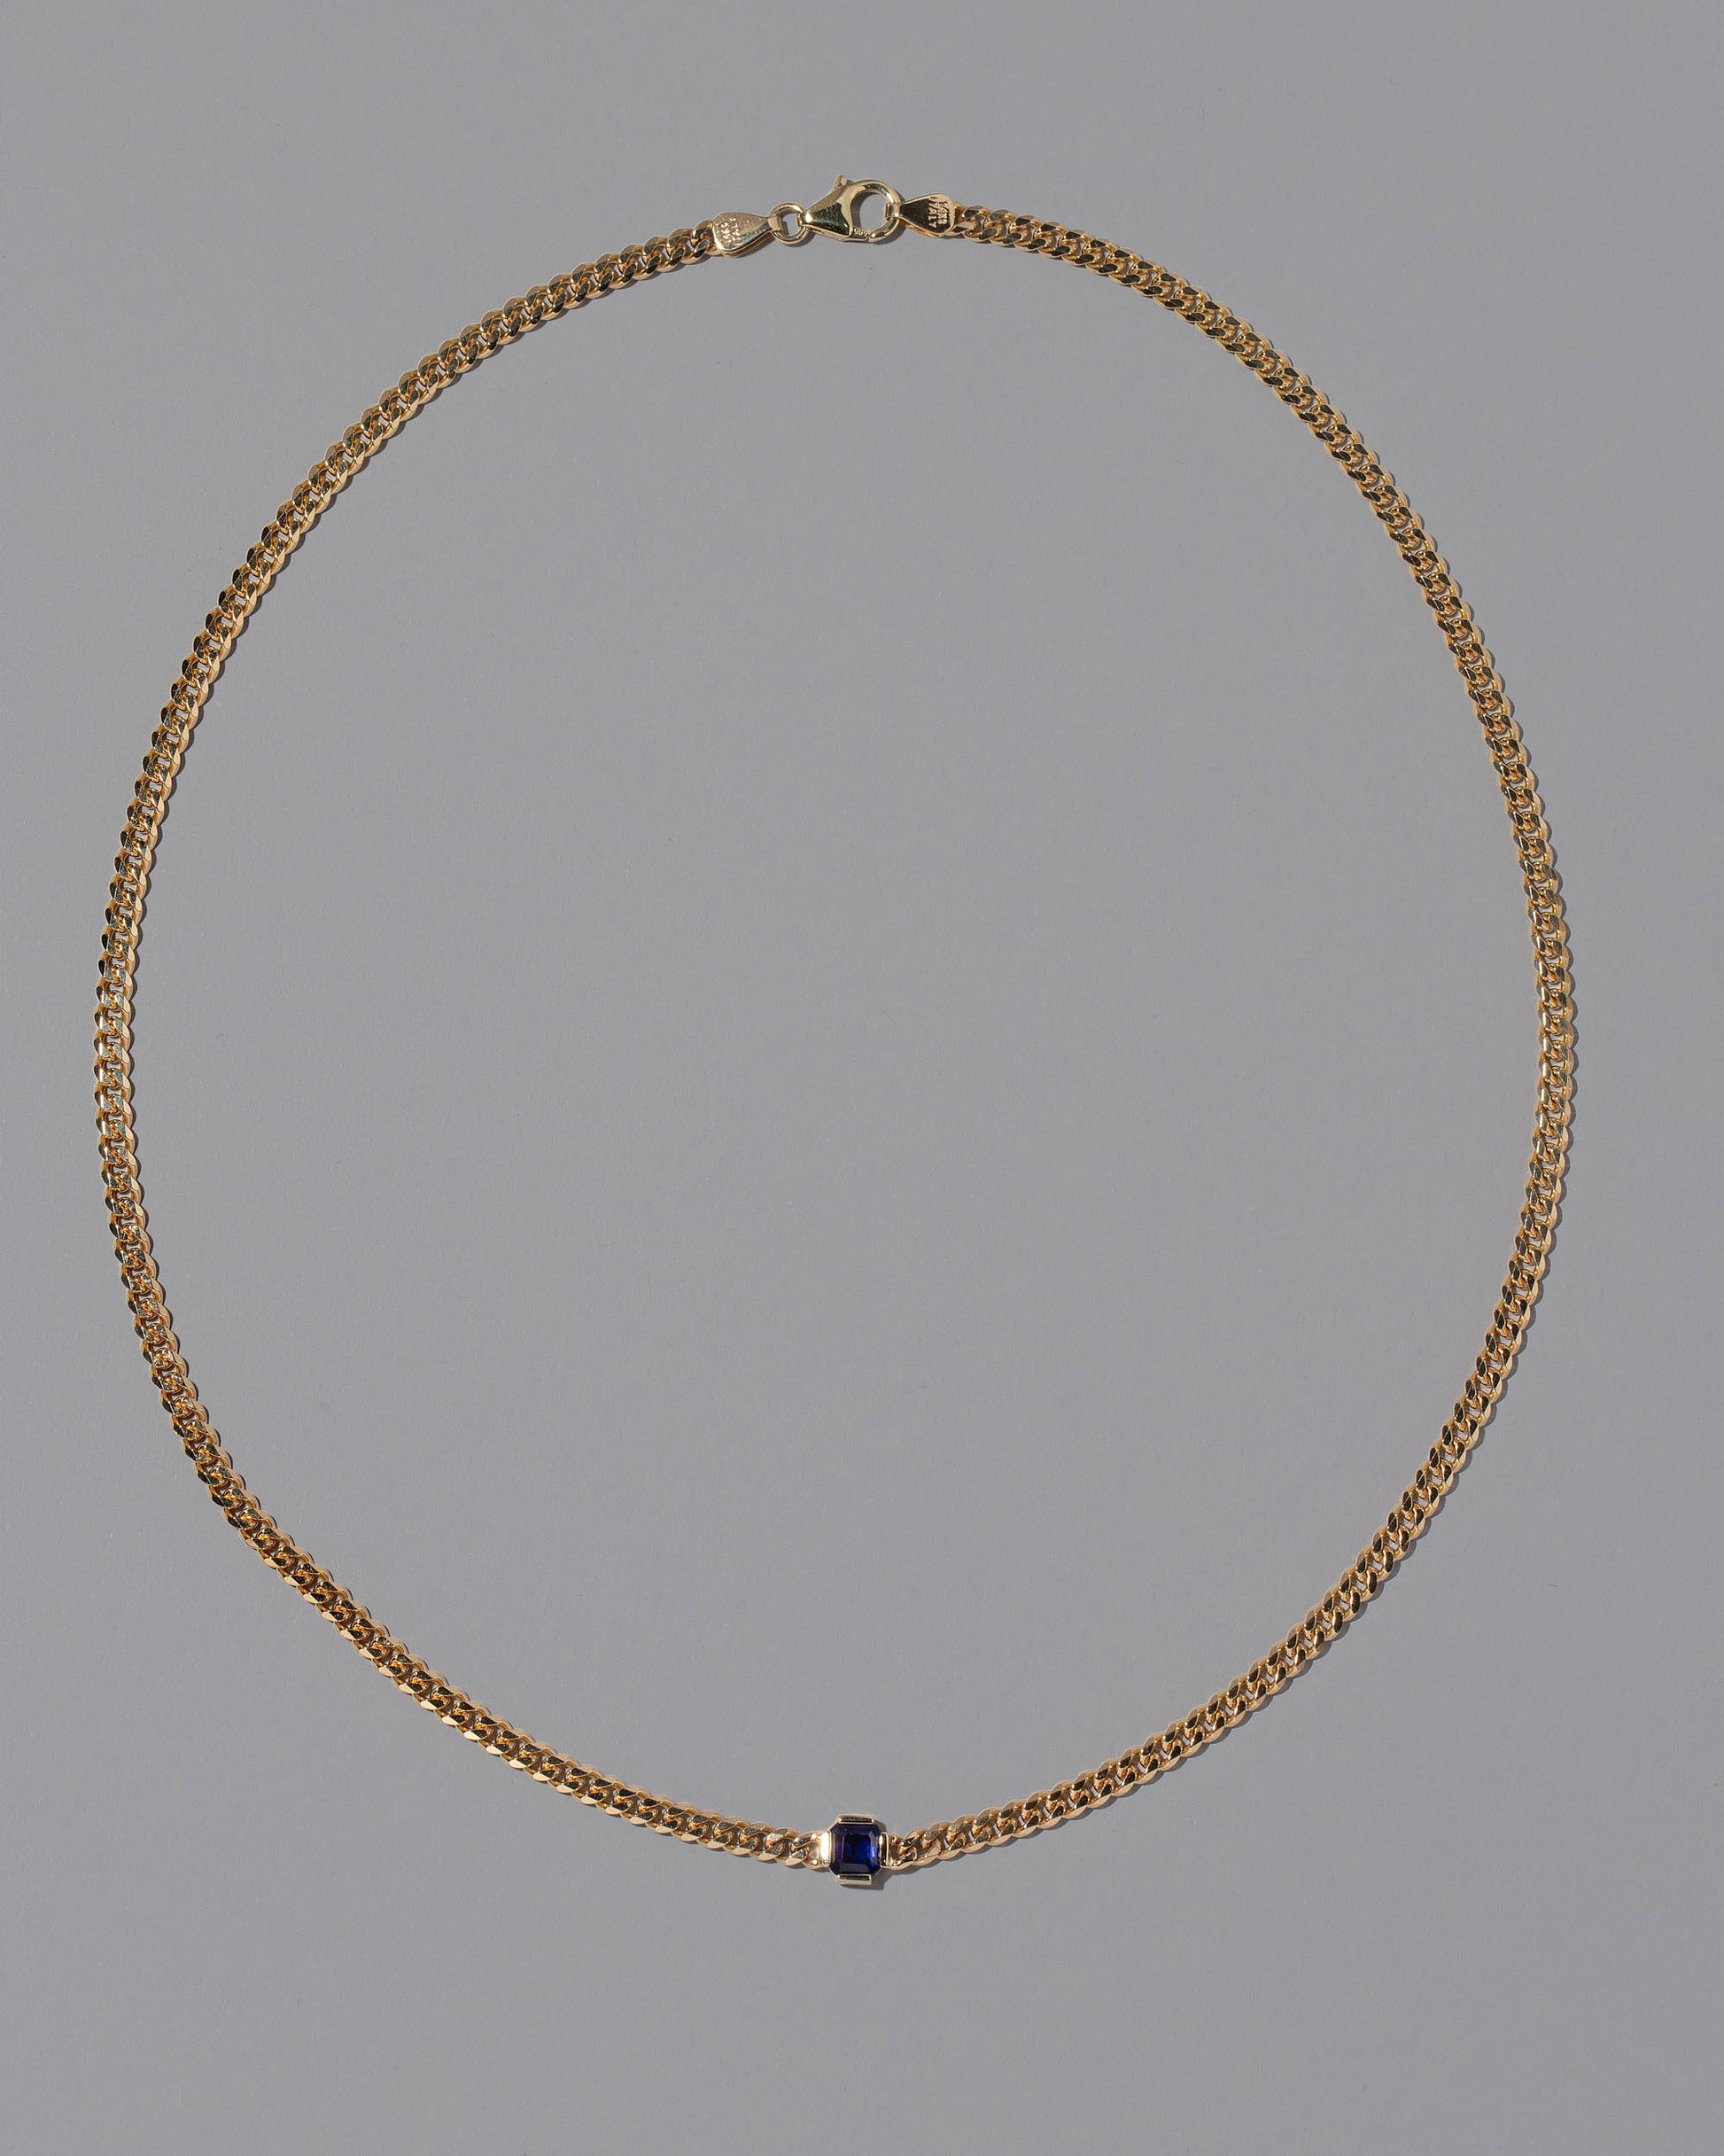 Blue Sapphire Fold Necklace on grey color background.